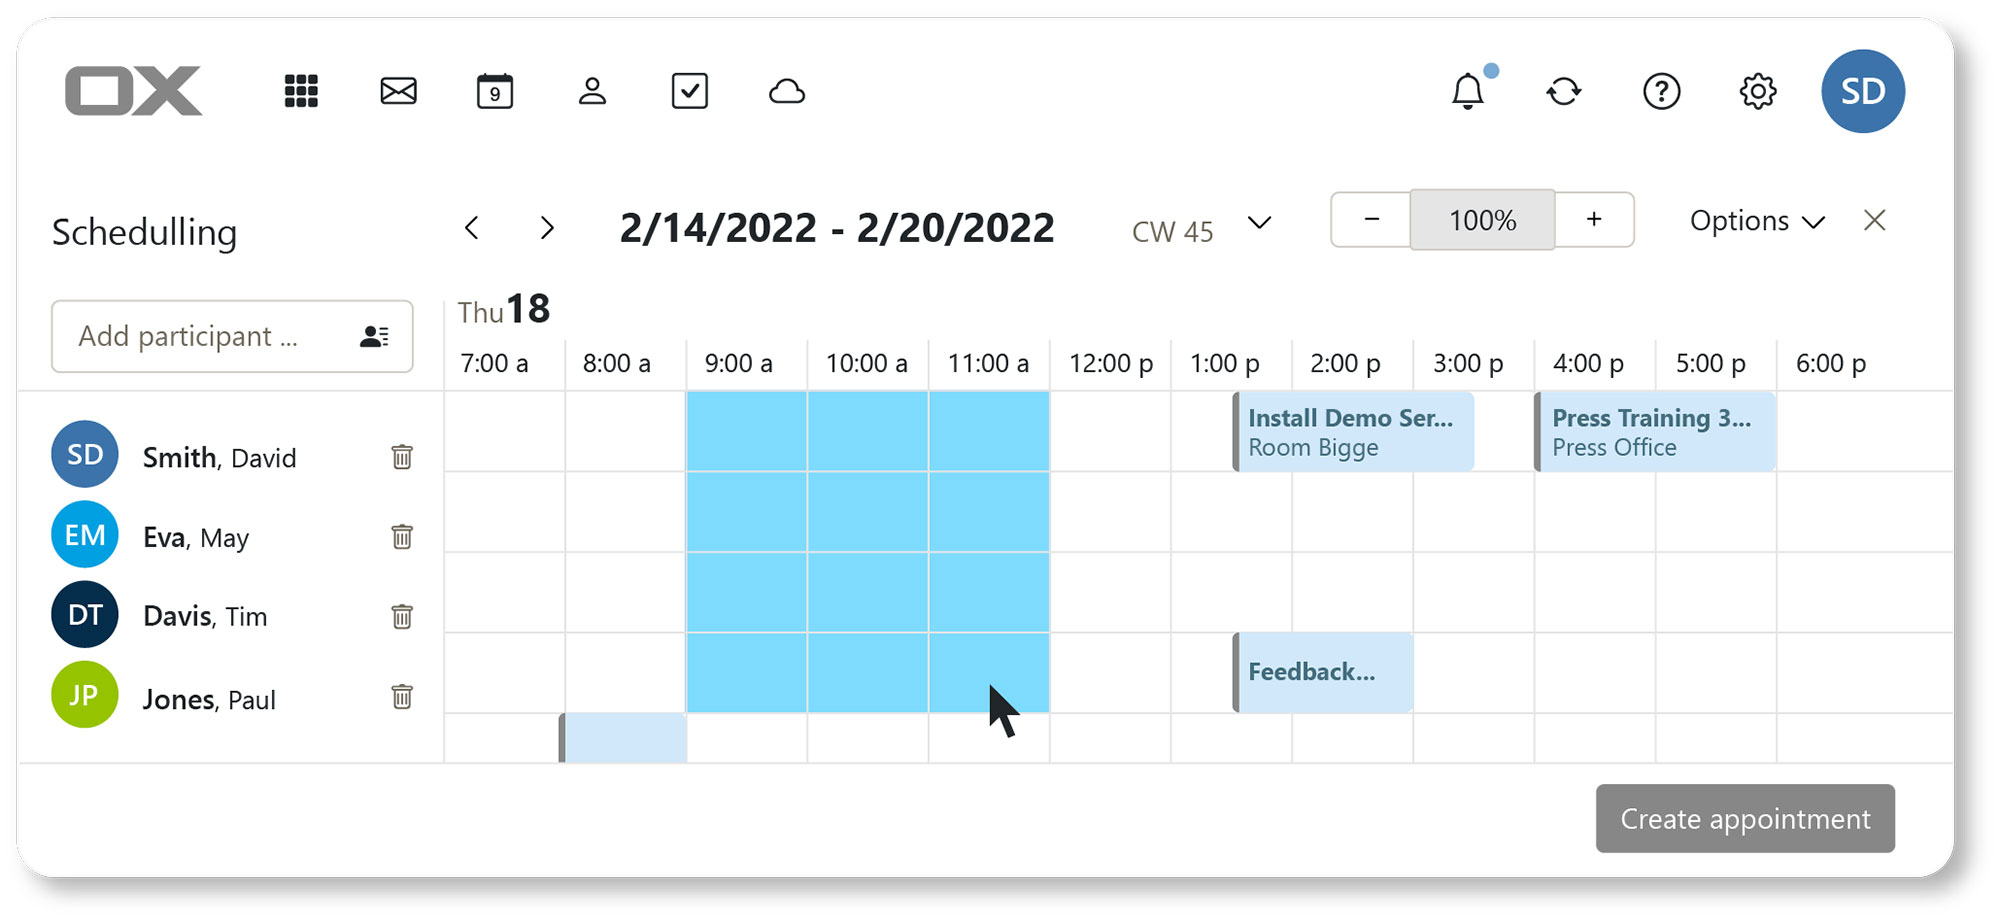 Scheduling View & Finding a Free Time